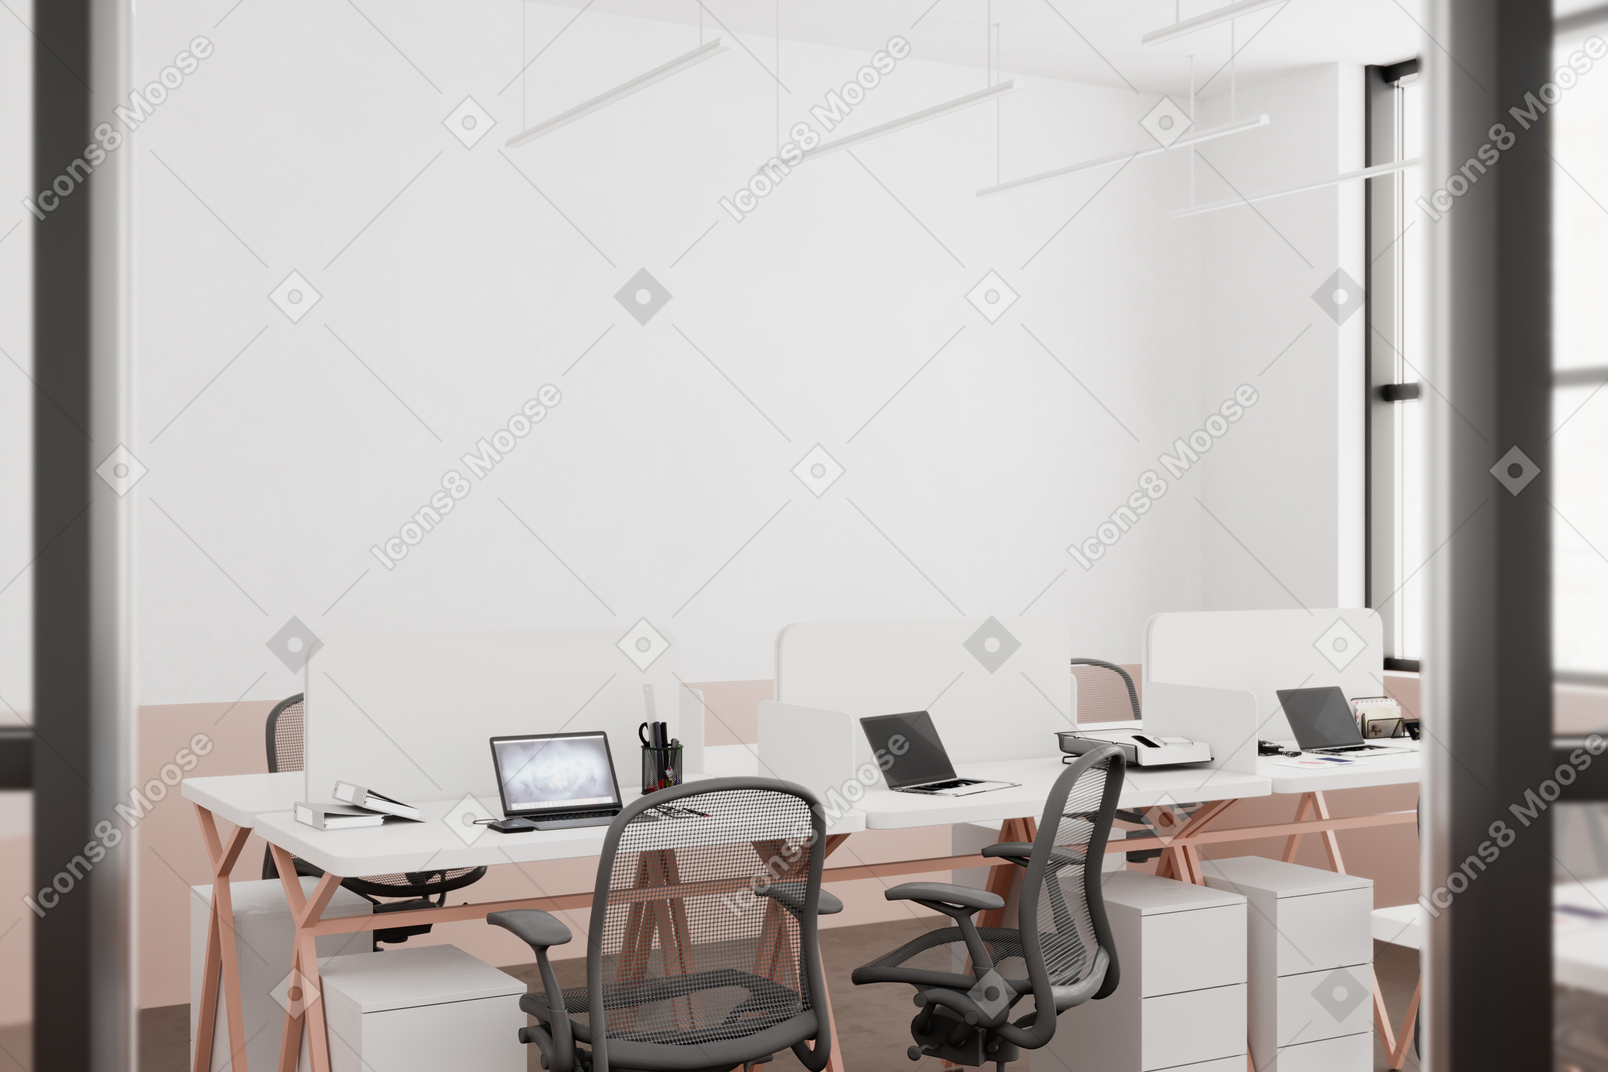 Desks, chairs and laptops in an office